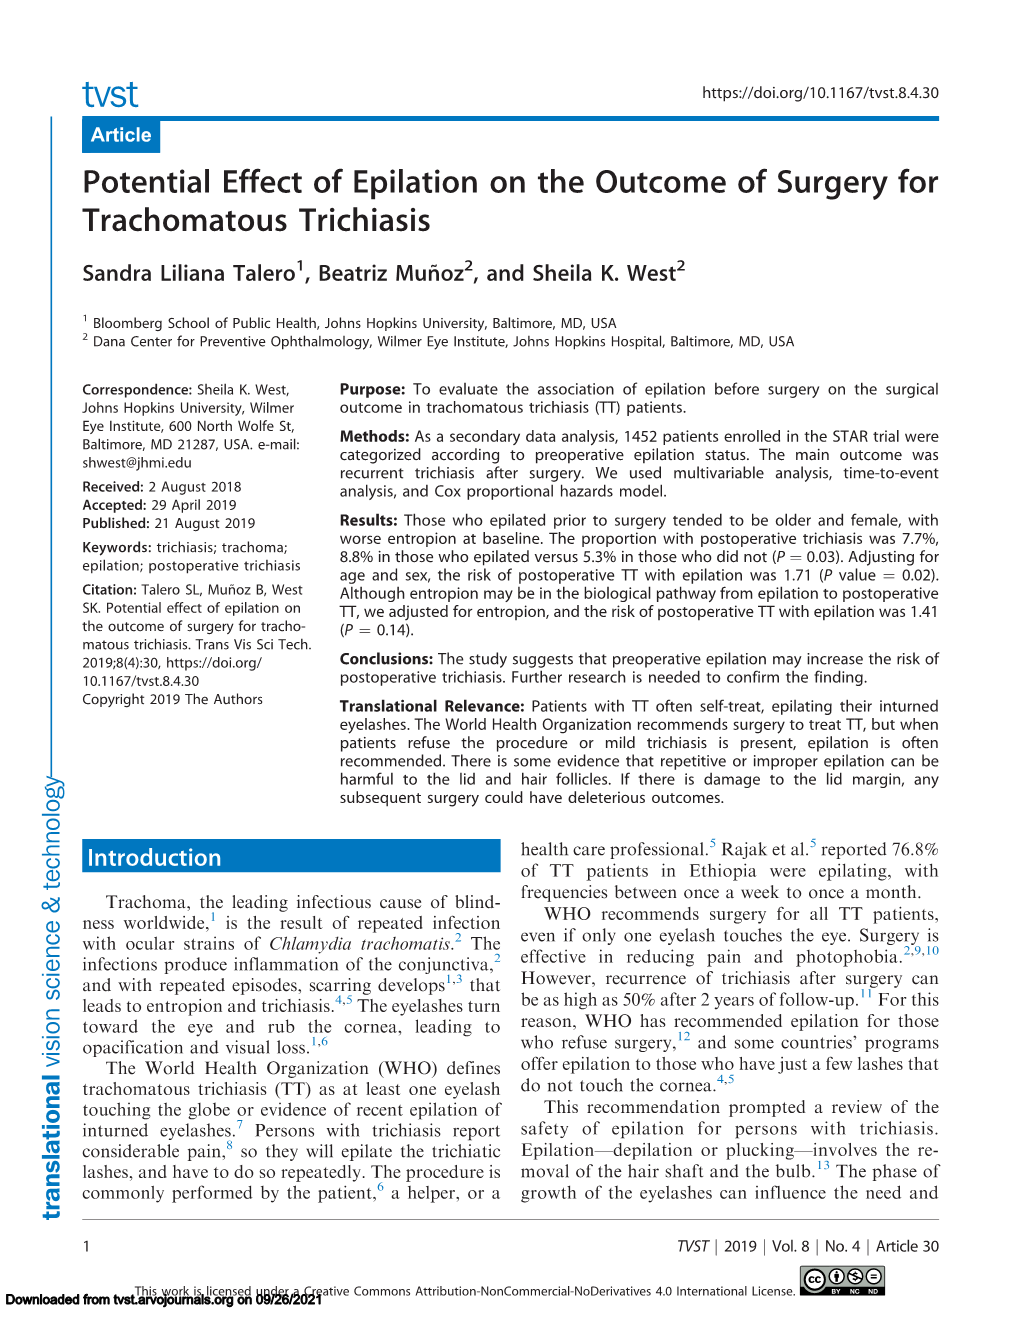 Potential Effect of Epilation on the Outcome of Surgery for Trachomatous Trichiasis